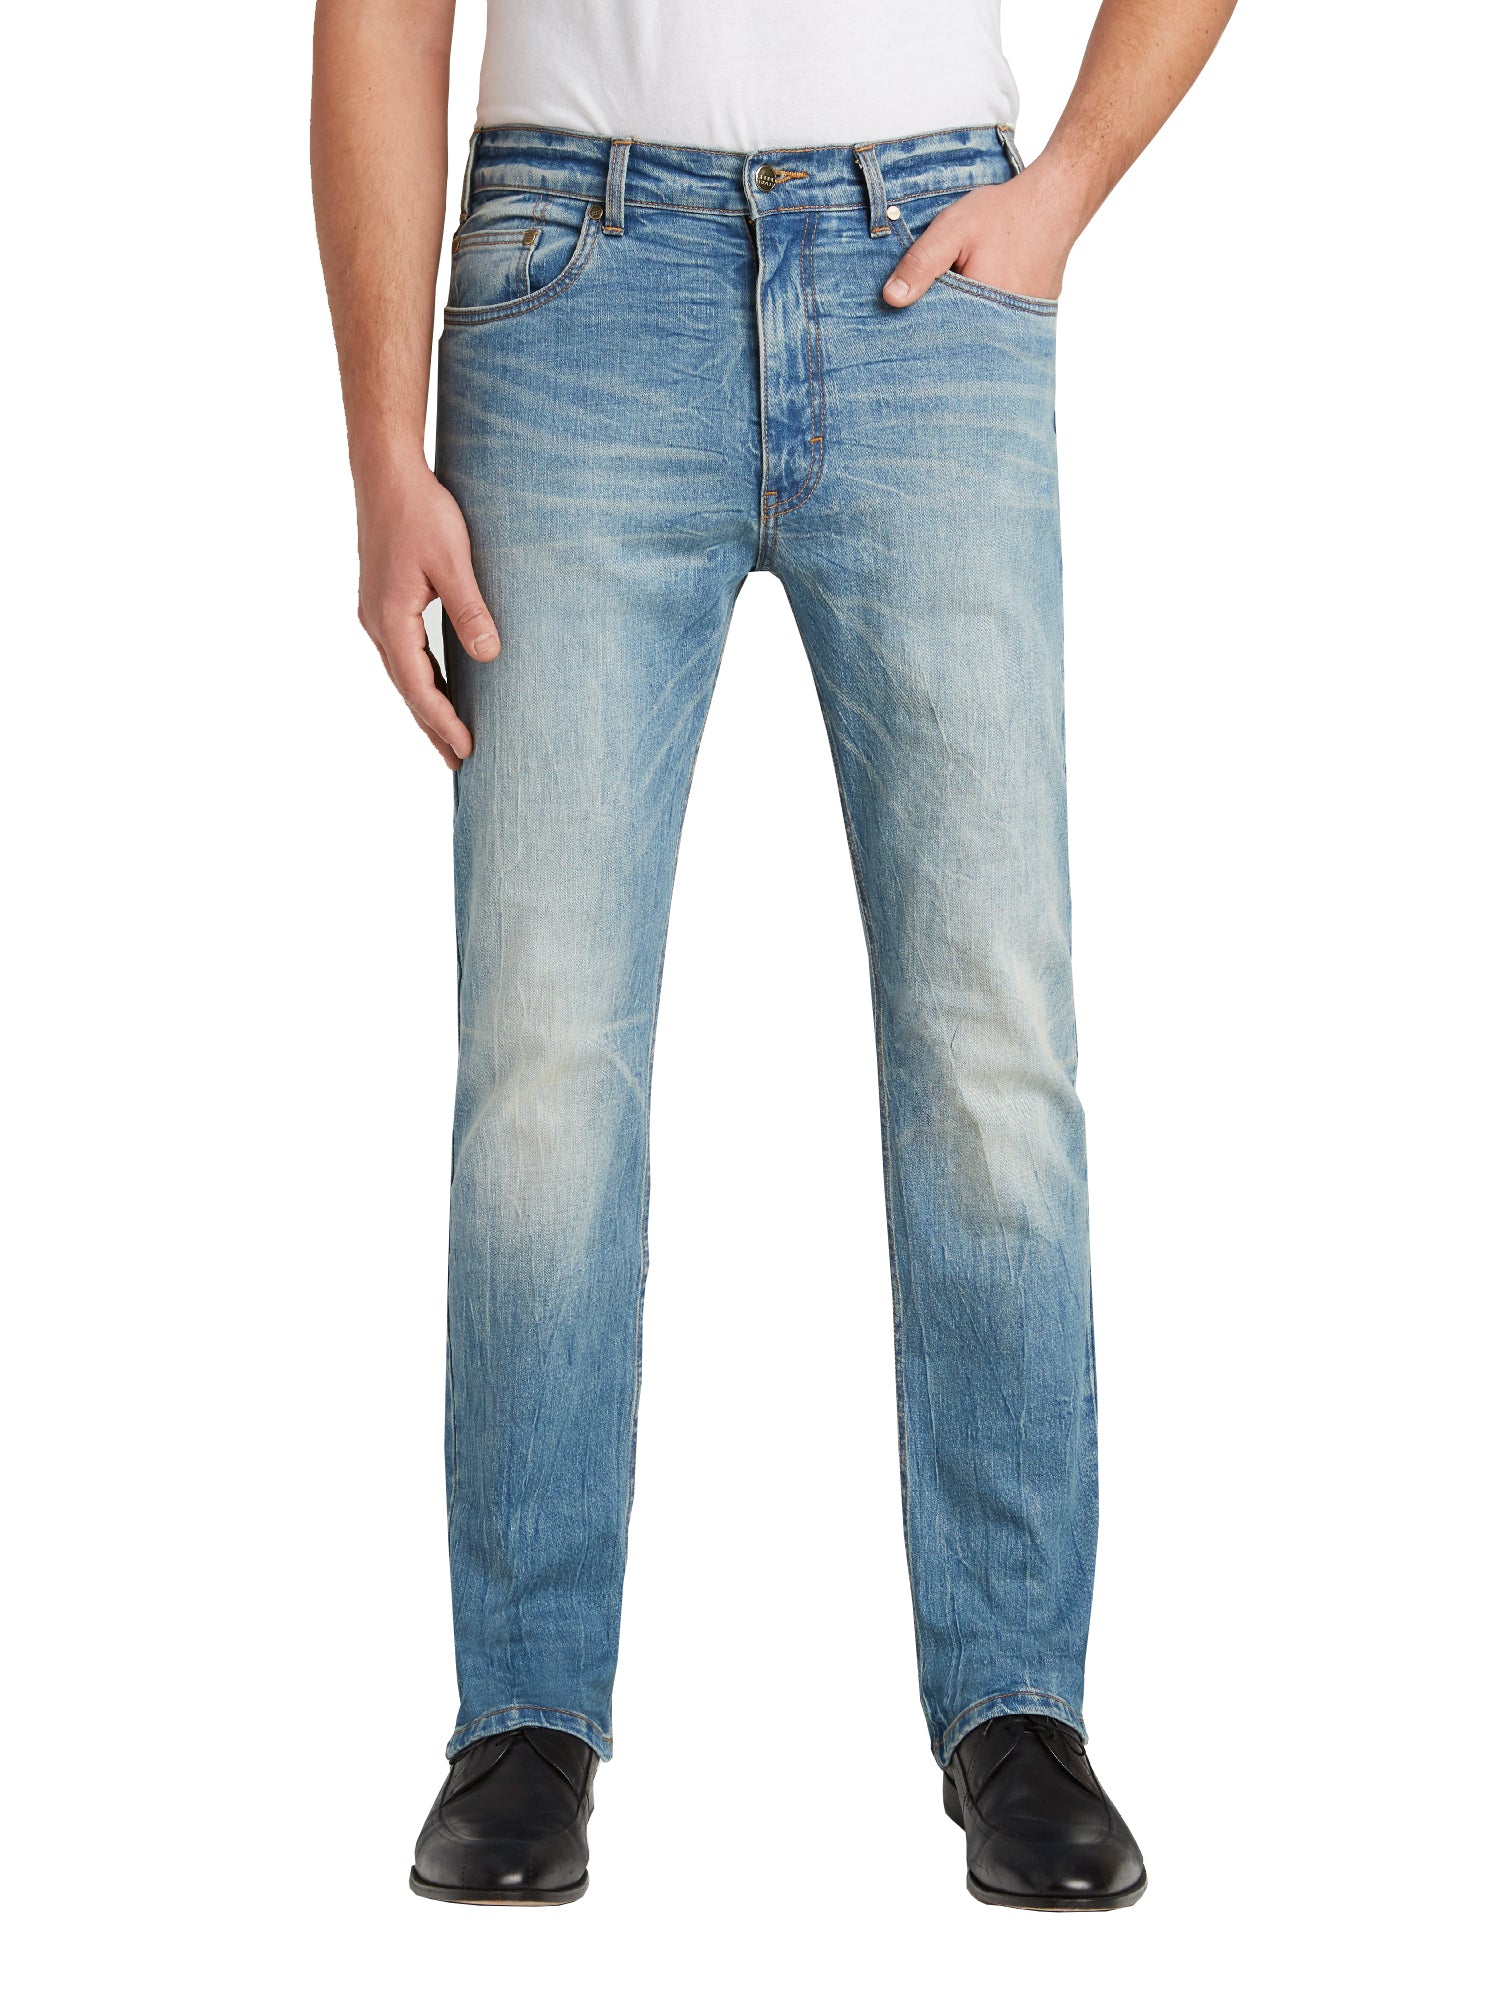 Grand River Distressed Stretch Jeans in Light Wash